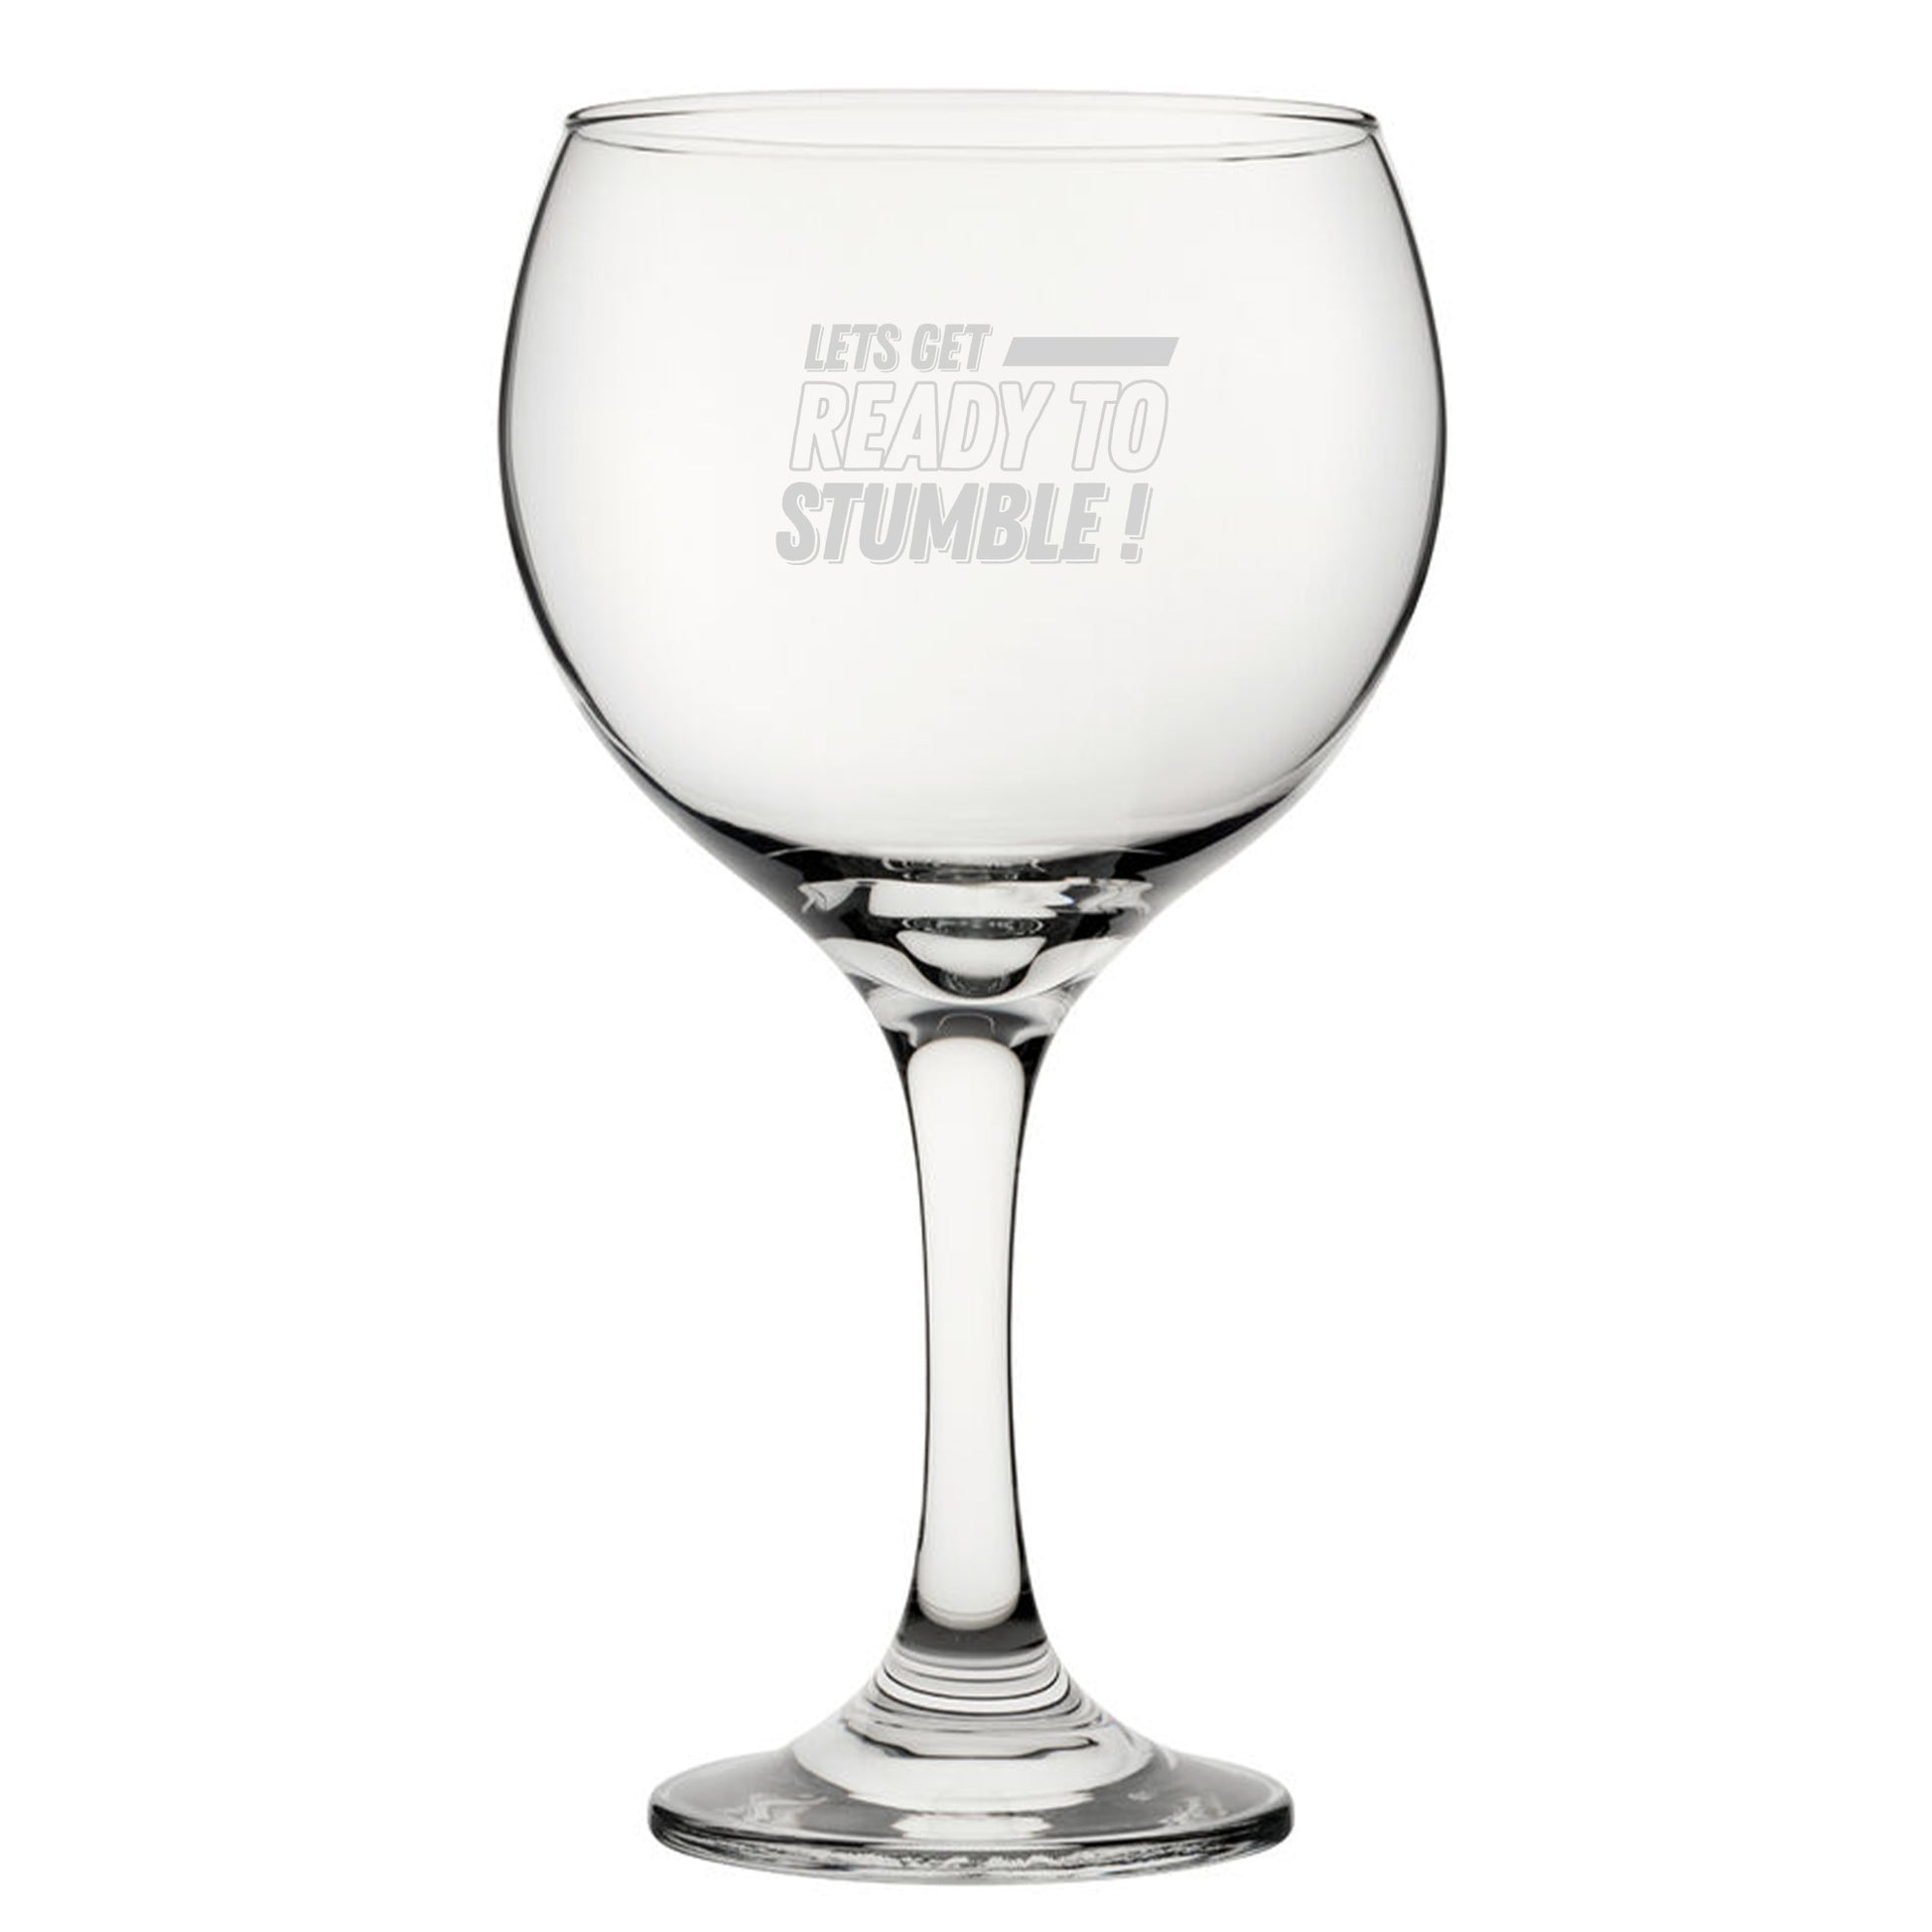 Let's Get Ready To Stumble - Engraved Novelty Gin Balloon Cocktail Glass Image 2